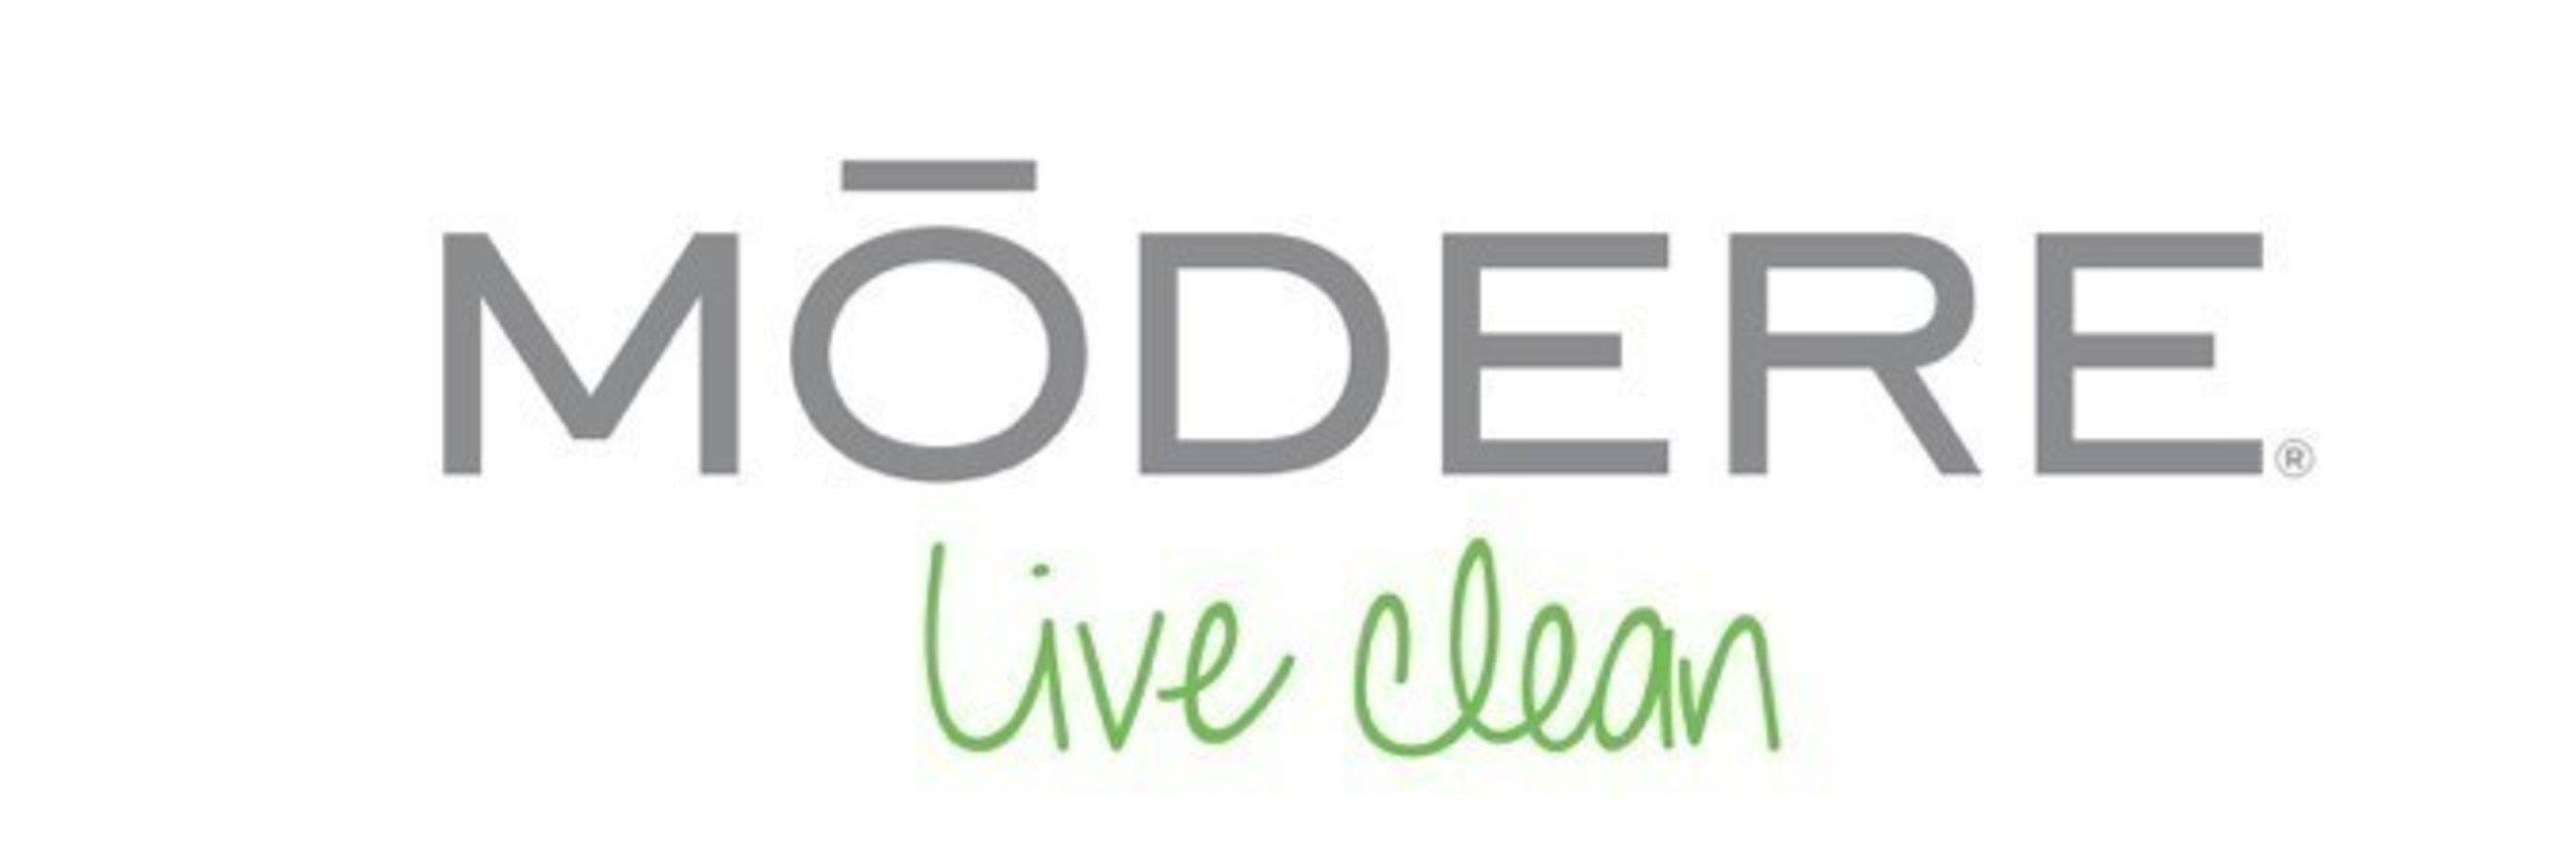 Modere Logo - Local Office Celebrates Eco-conscious Initiatives at Grand Opening